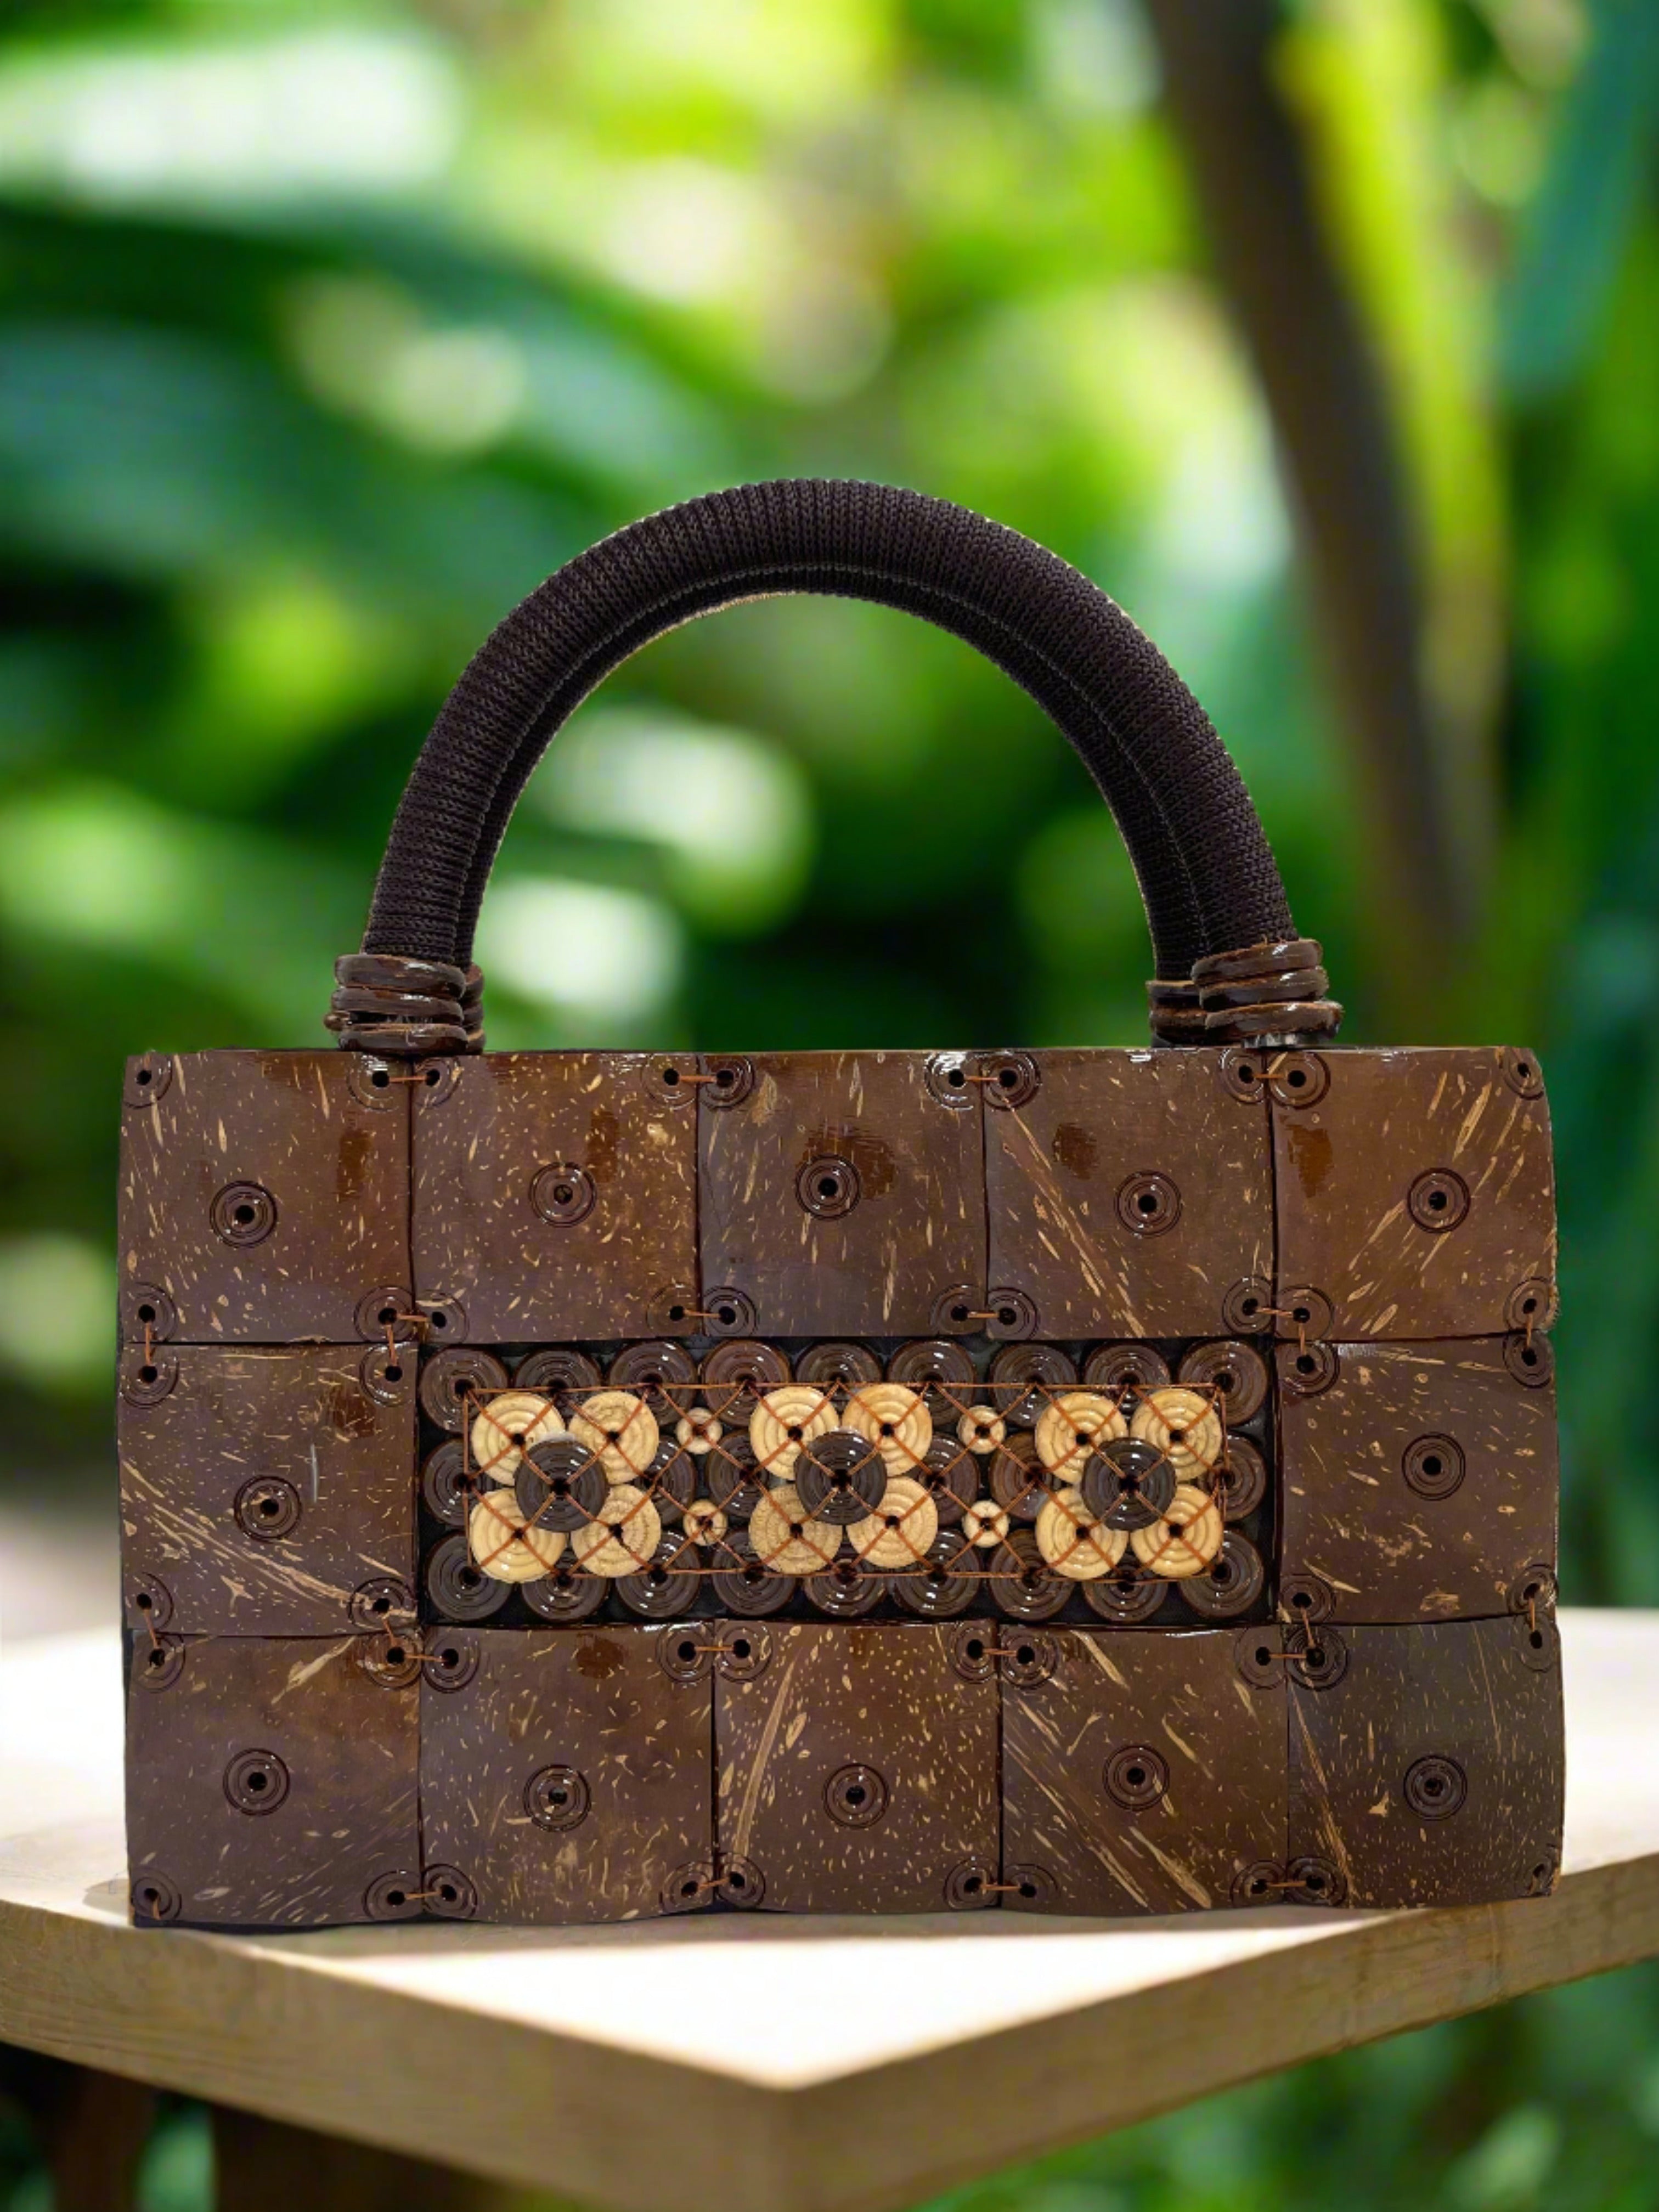 Ethnic Coconut Shell Handbag – Add a Unique Natural Touch to Your Style